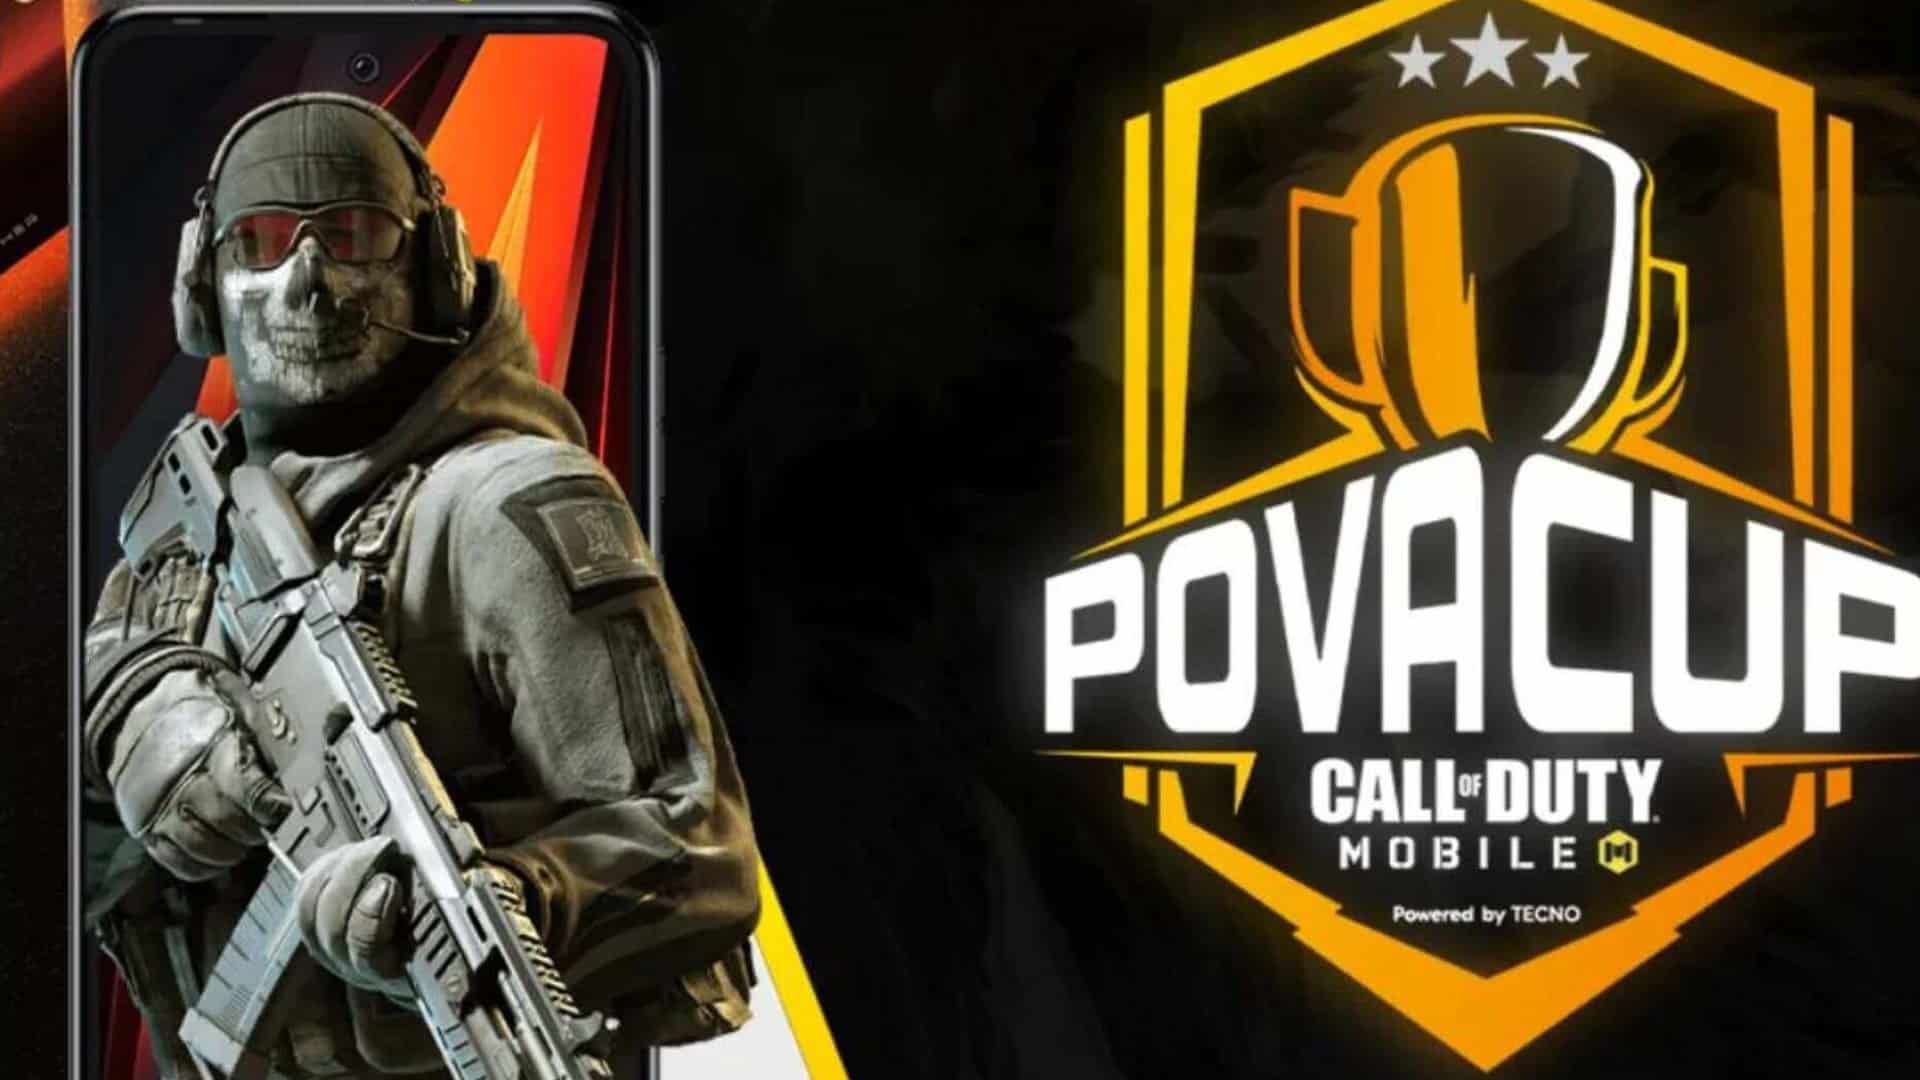 Call of Duty Mobile India POVA Cup: Everything You Need to Know